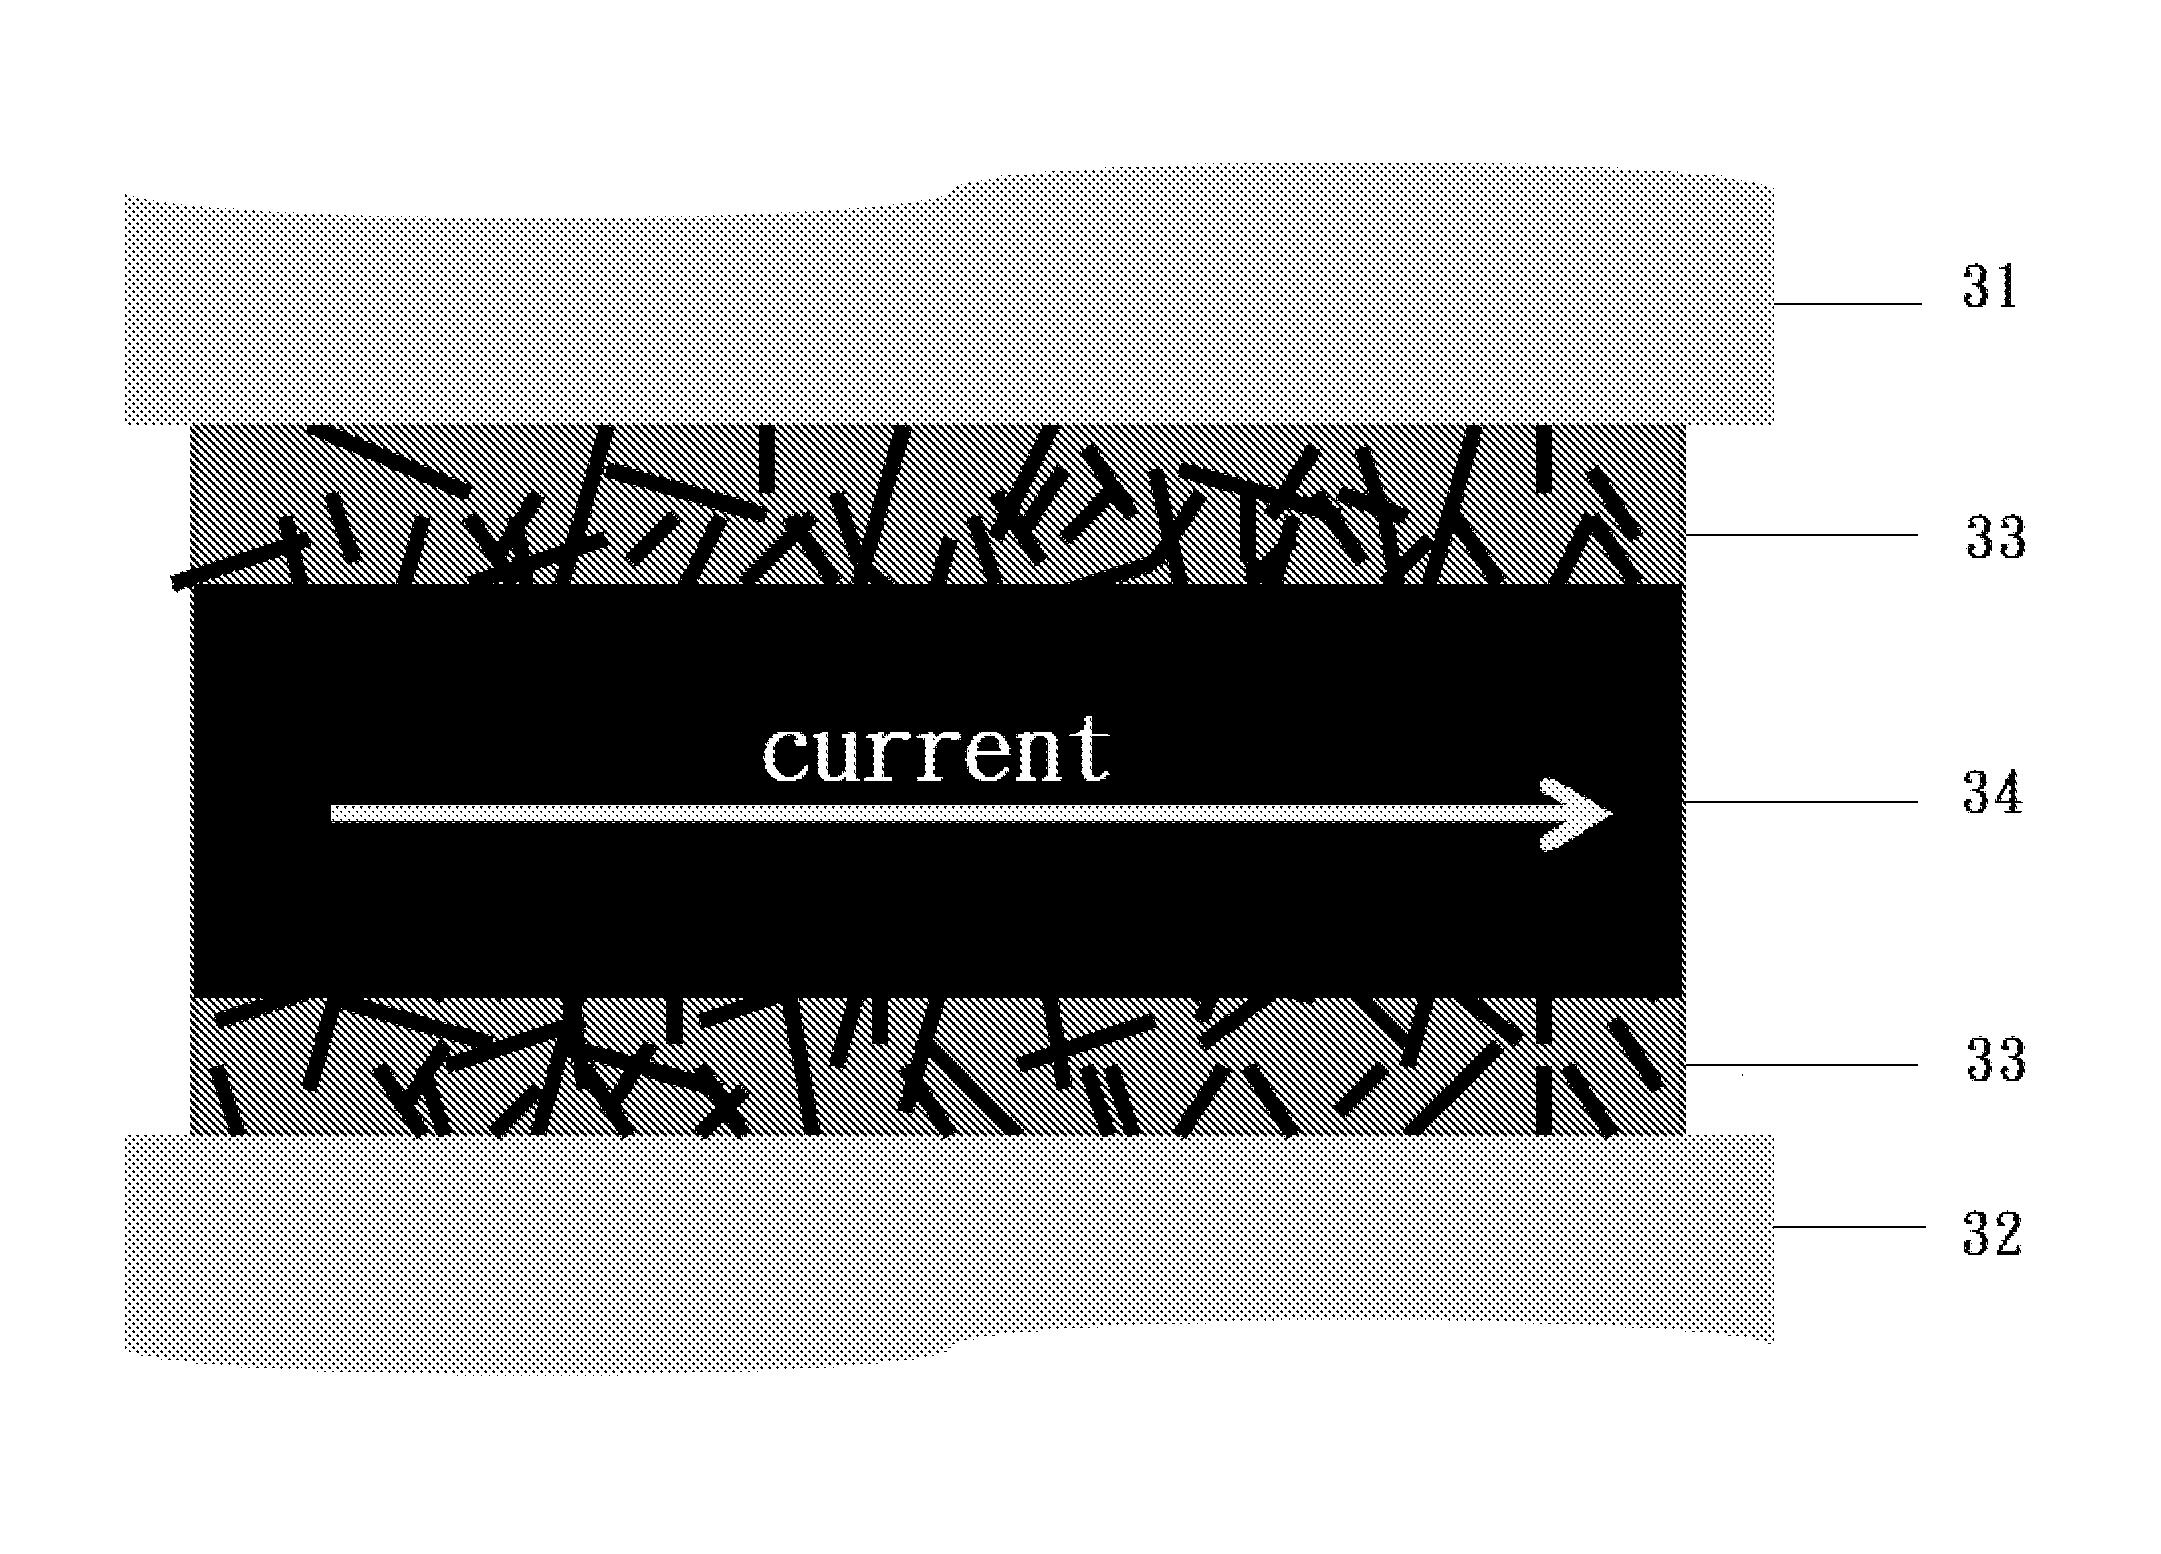 Method for bonding components by utilizing joule heating to cure carbon nanotube-epoxy resin composite adhesive